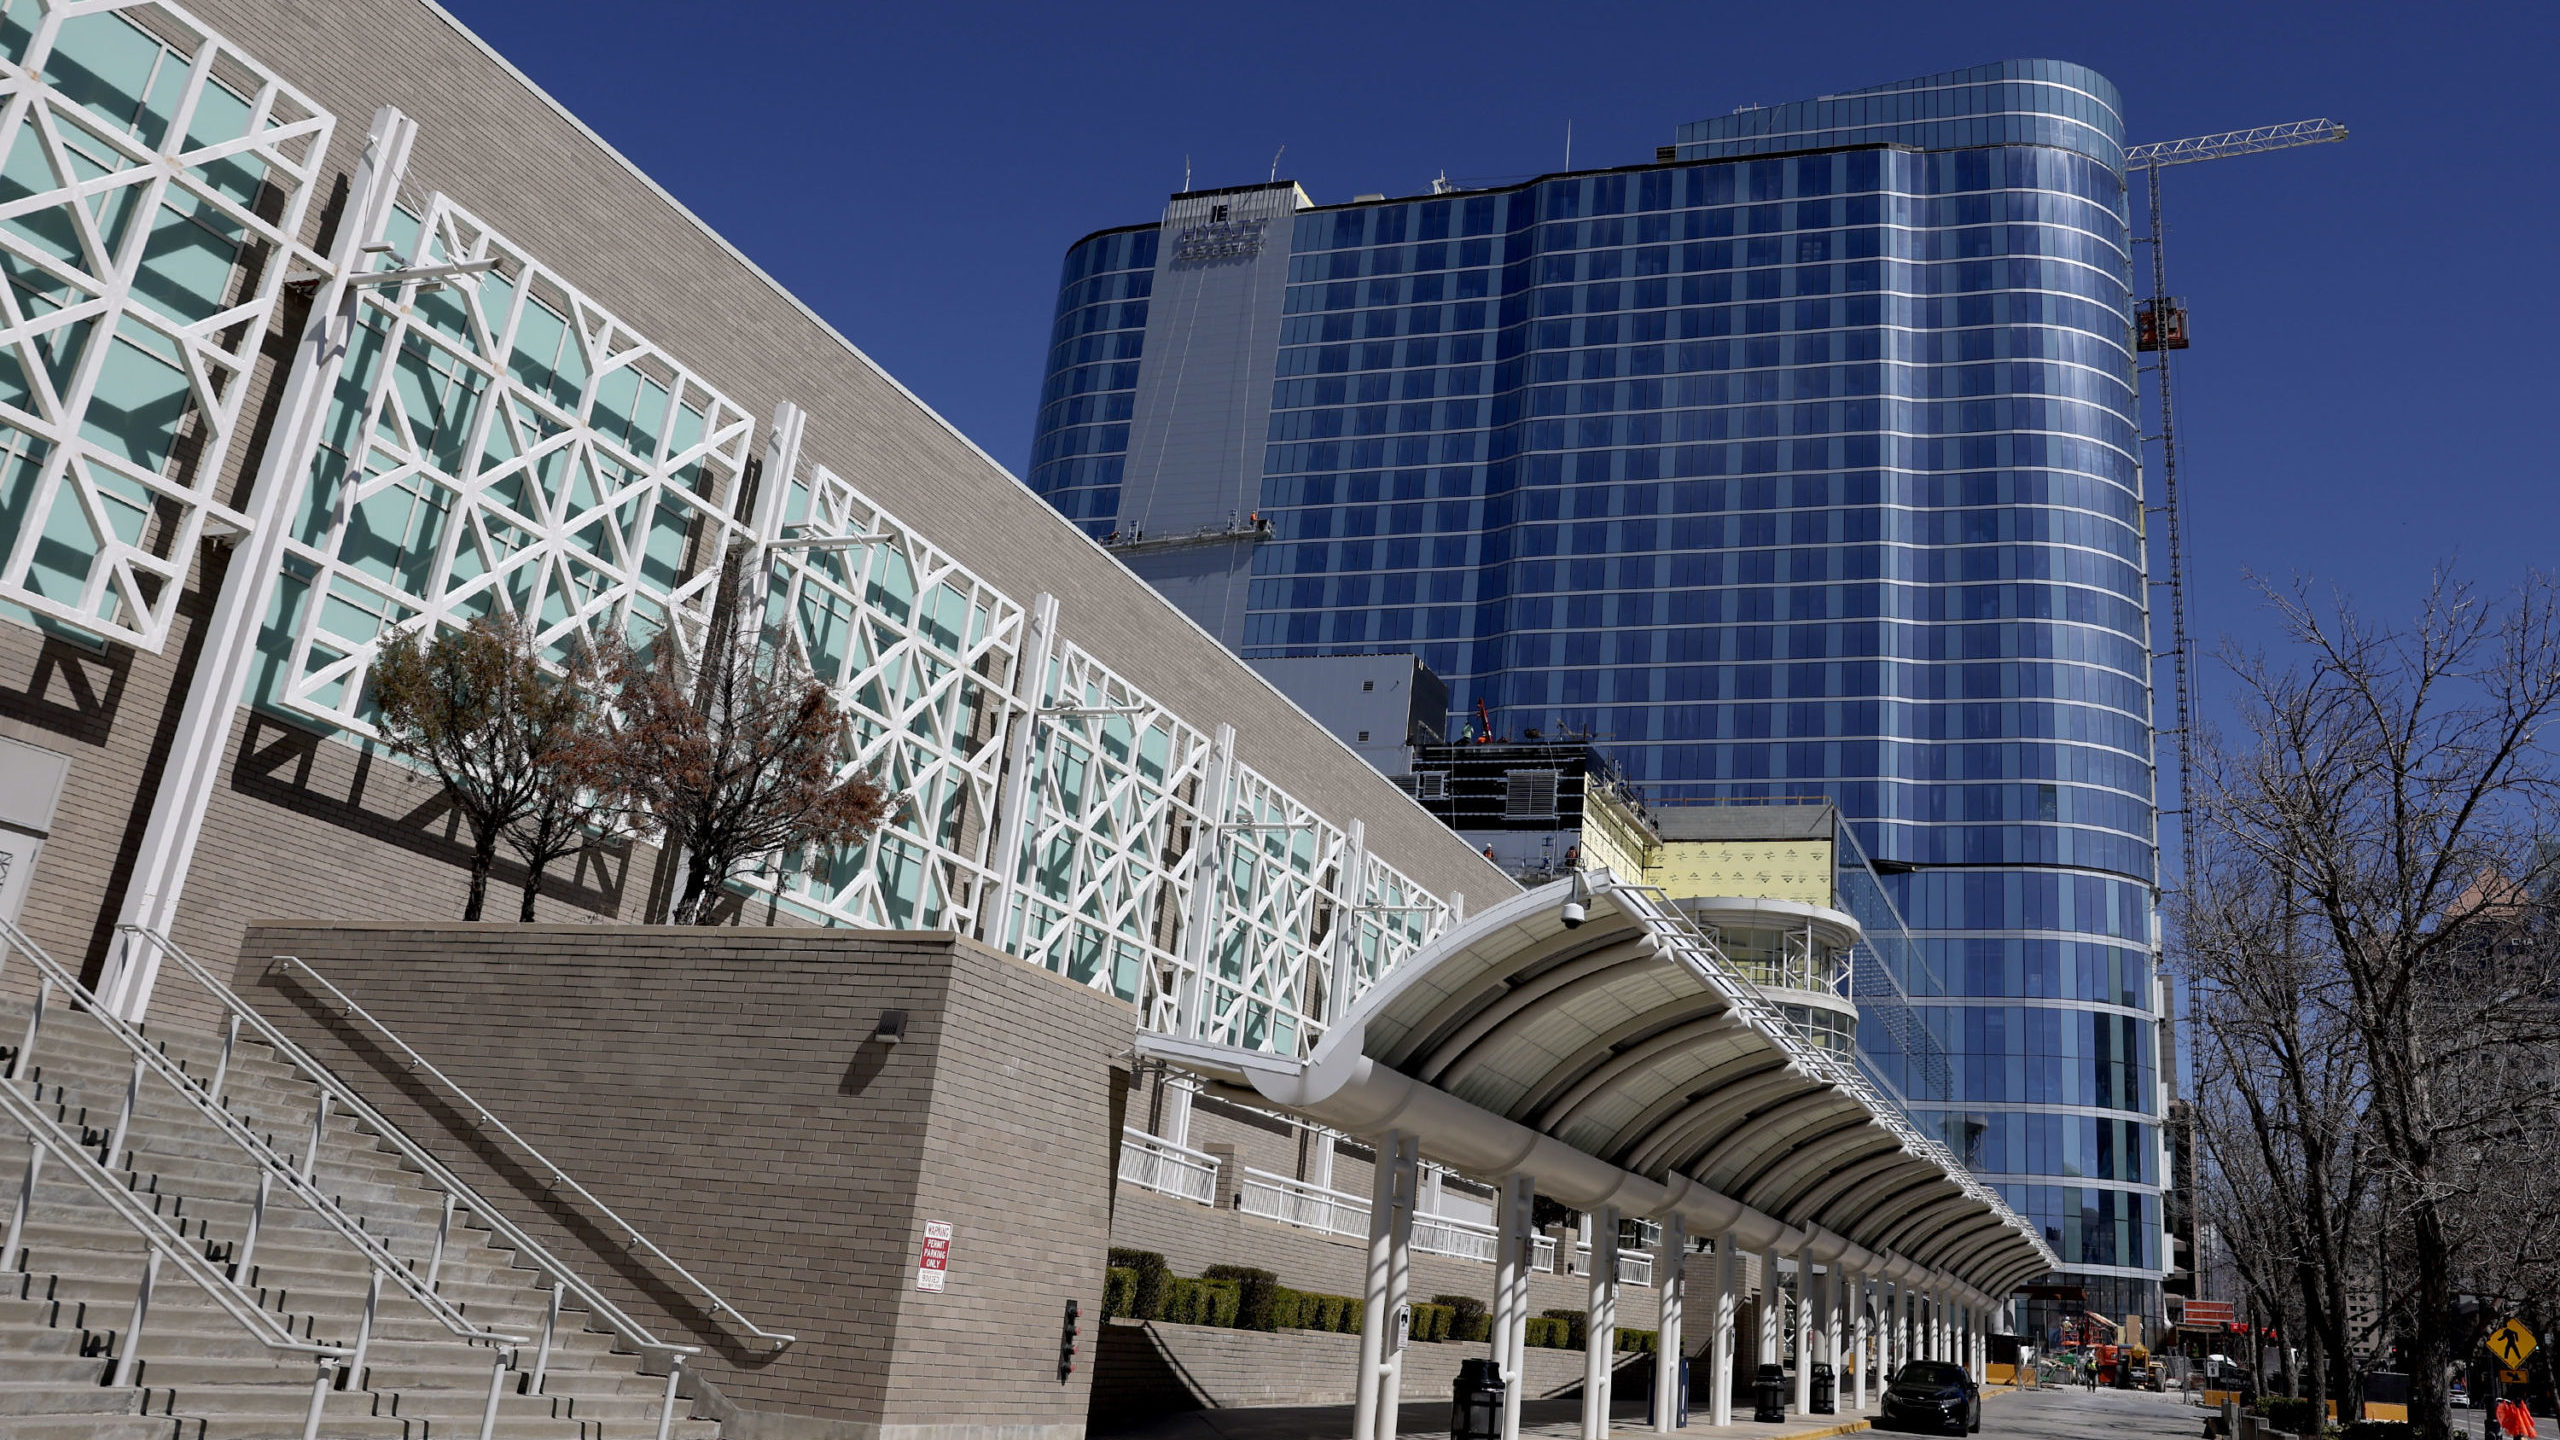 The Salt Palace Convention Center and the Hyatt Regency are pictured in Salt Lake City on Wednesday...